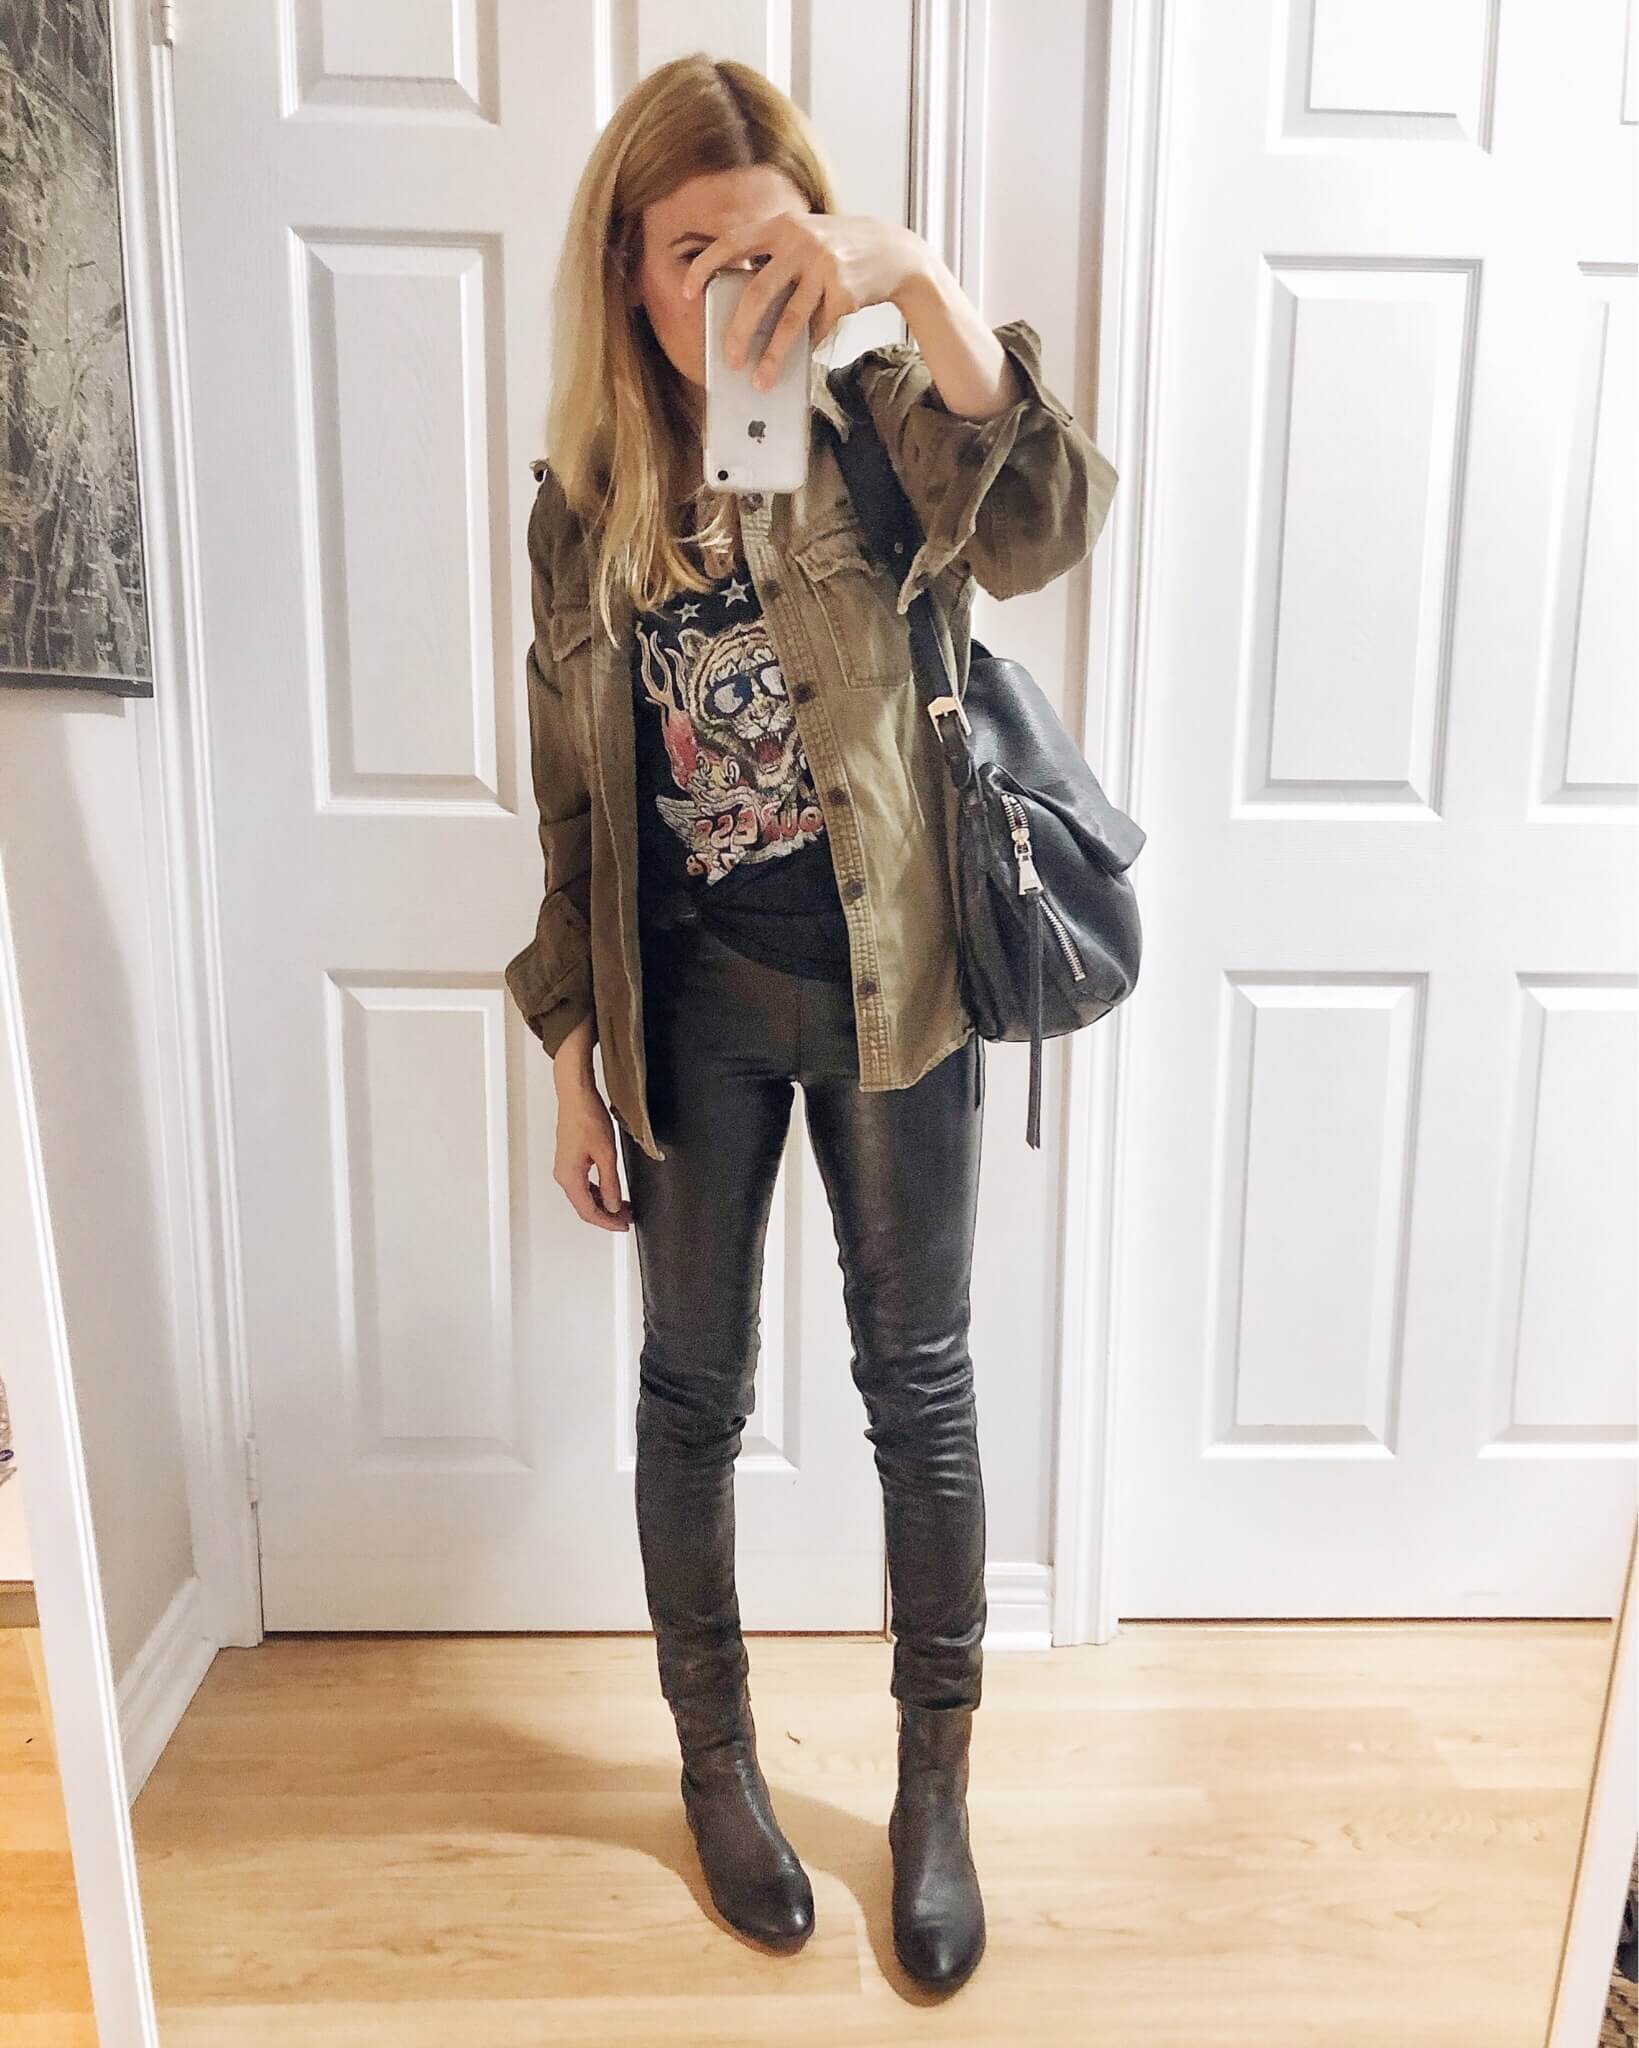 What I Wore. I am wearing an Aerosmith T-shirt from Dirty Cotton Scoundrels, an oversized military style jacket, faux leather pants, and black boots. #livelovesara